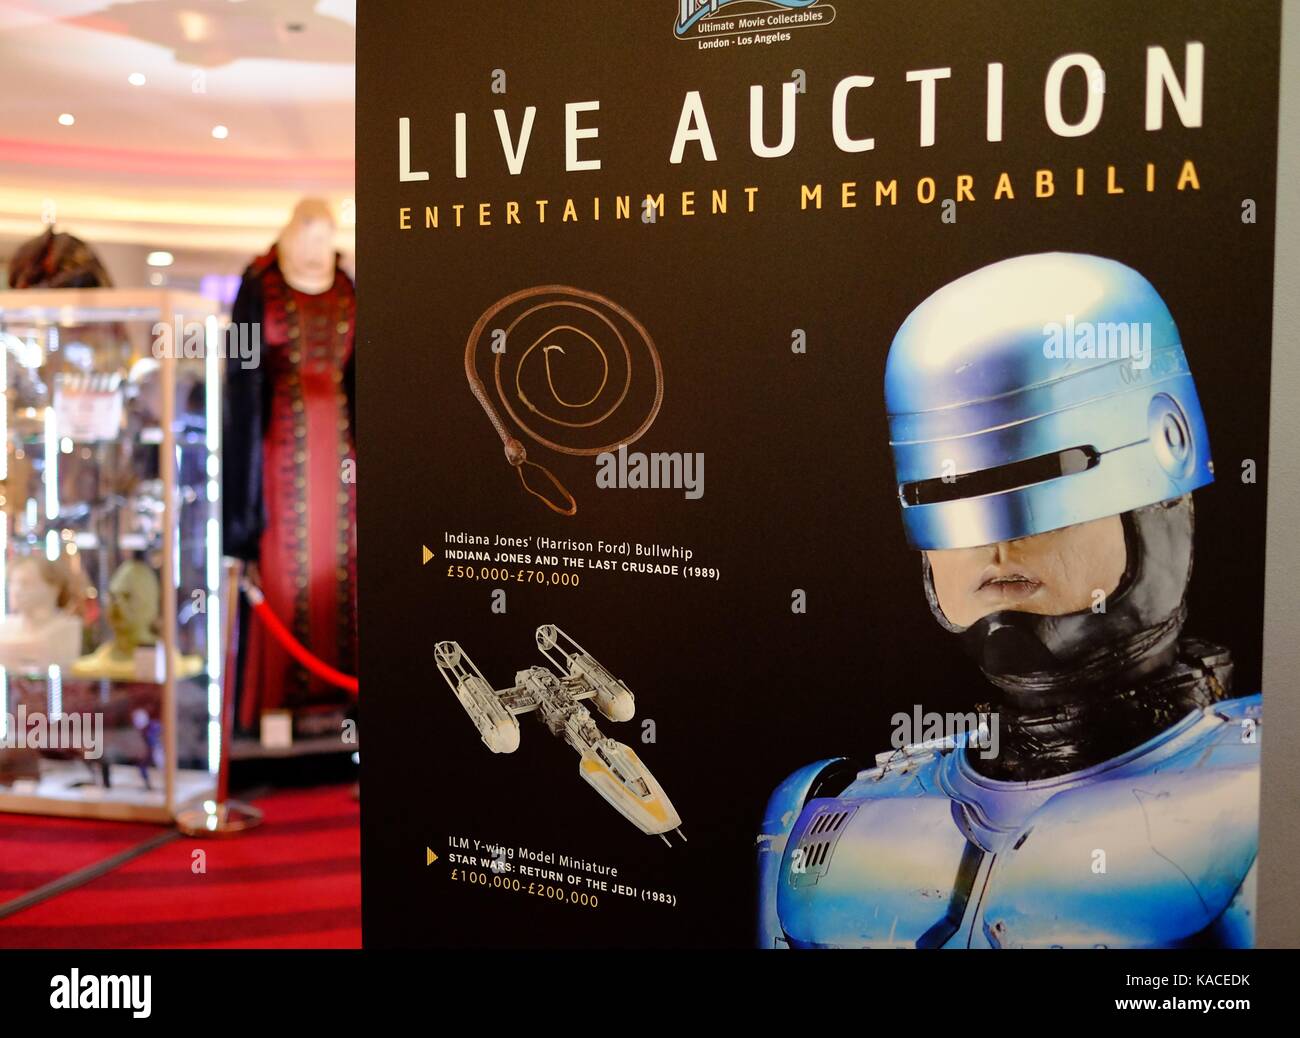 Exhibition in advance of the live auction at the BFI IMAX on 26th September 2017 of TV and movie memorabilia Stock Photo